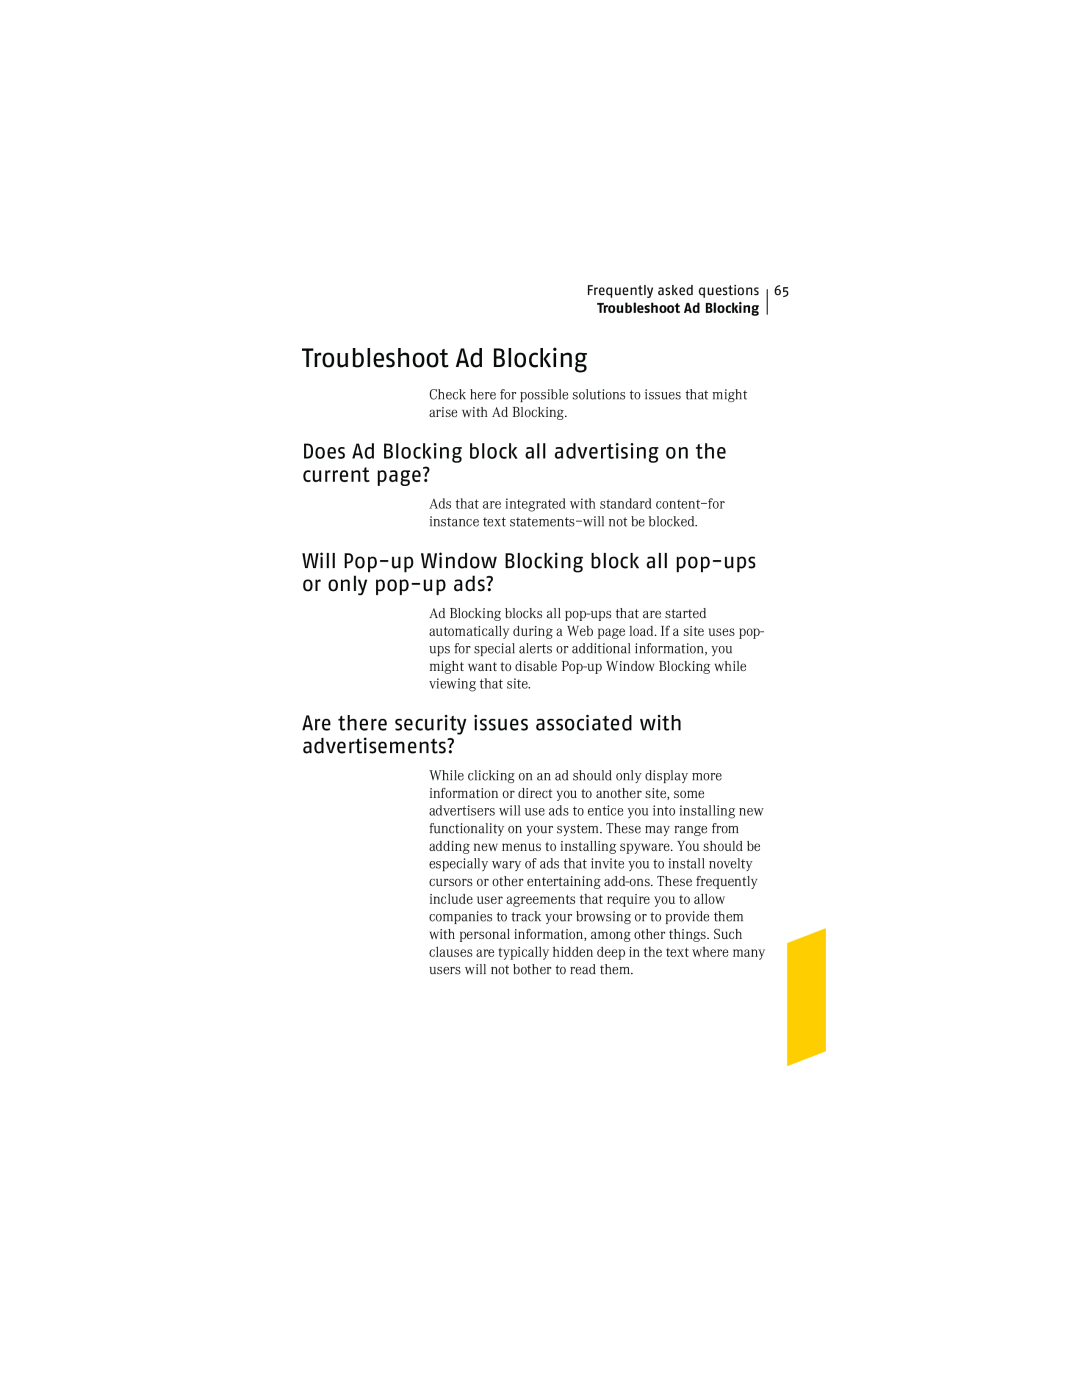 Symantec NIS2005 manual Troubleshoot Ad Blocking, Frequently asked questions 